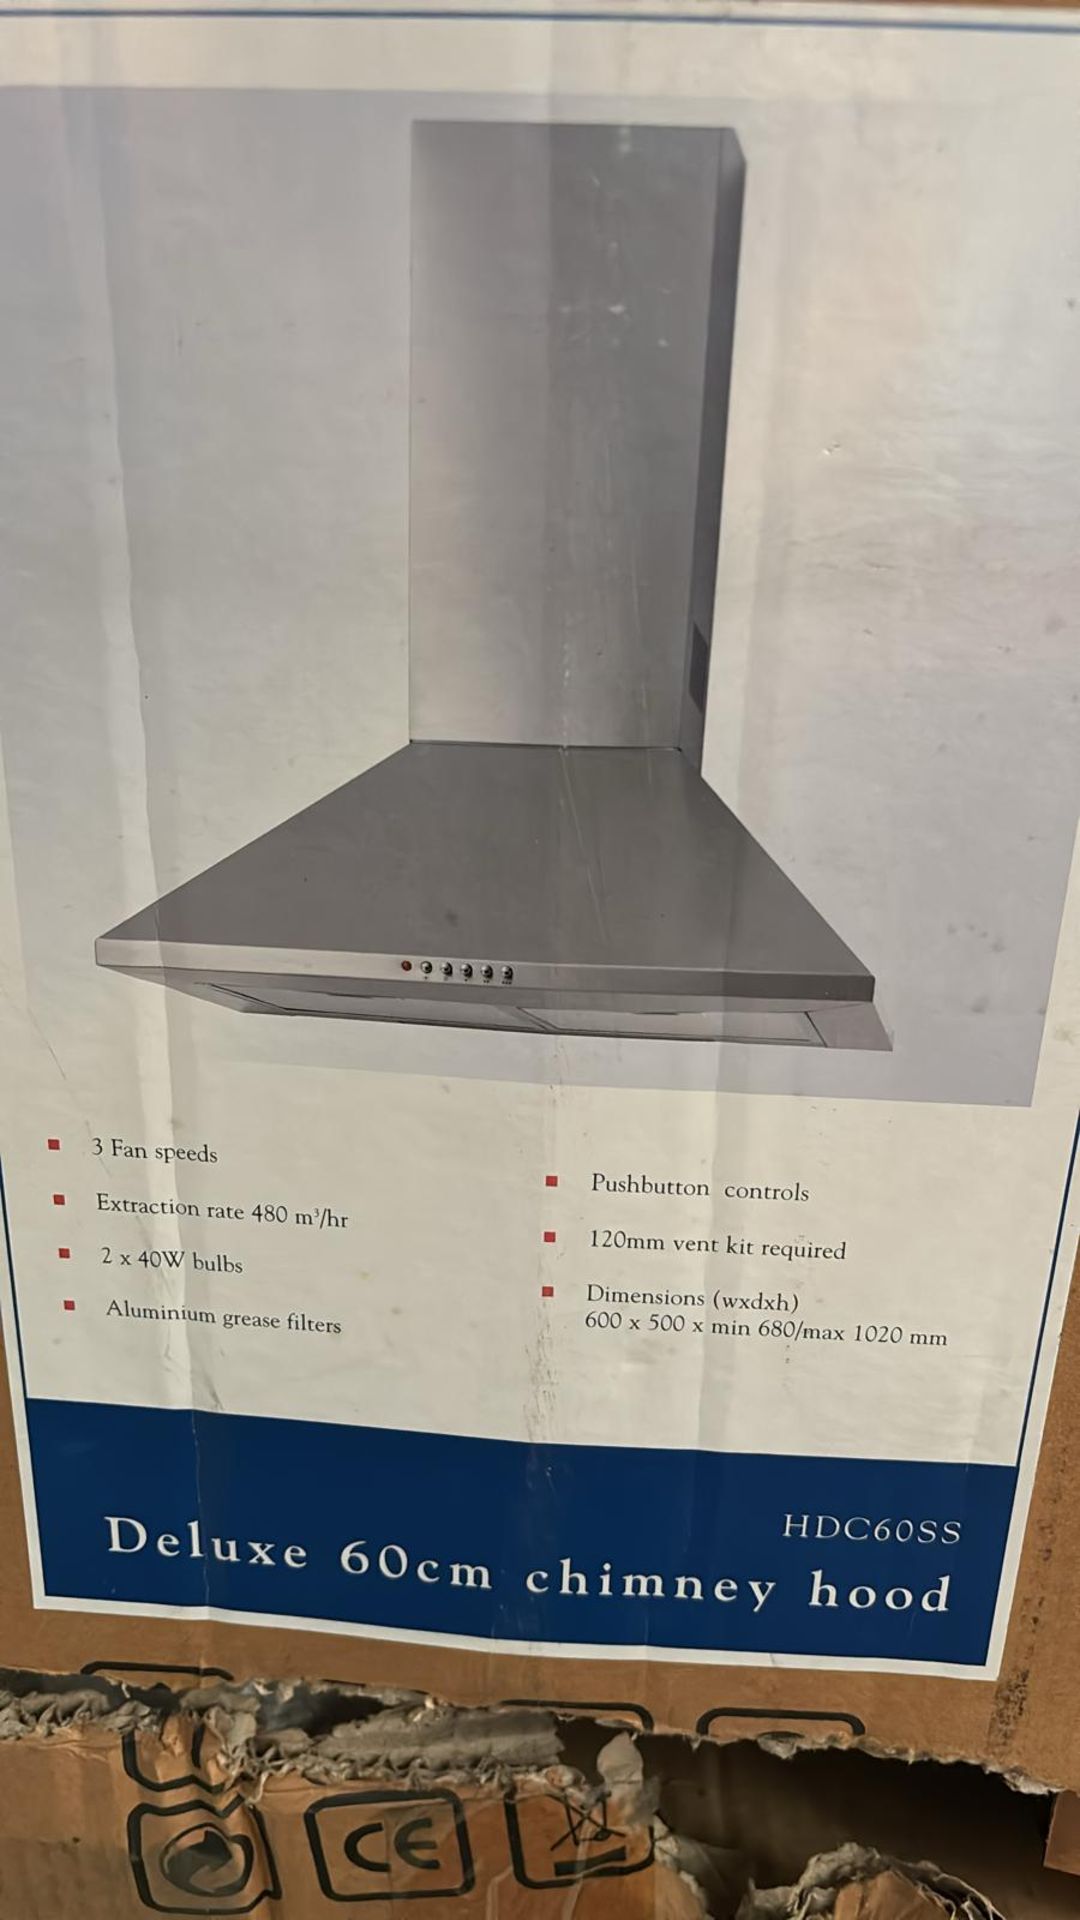 Brand New Boxed HDC60SS deluxe 60cm Chimney Hood RRP £179 - Image 2 of 2